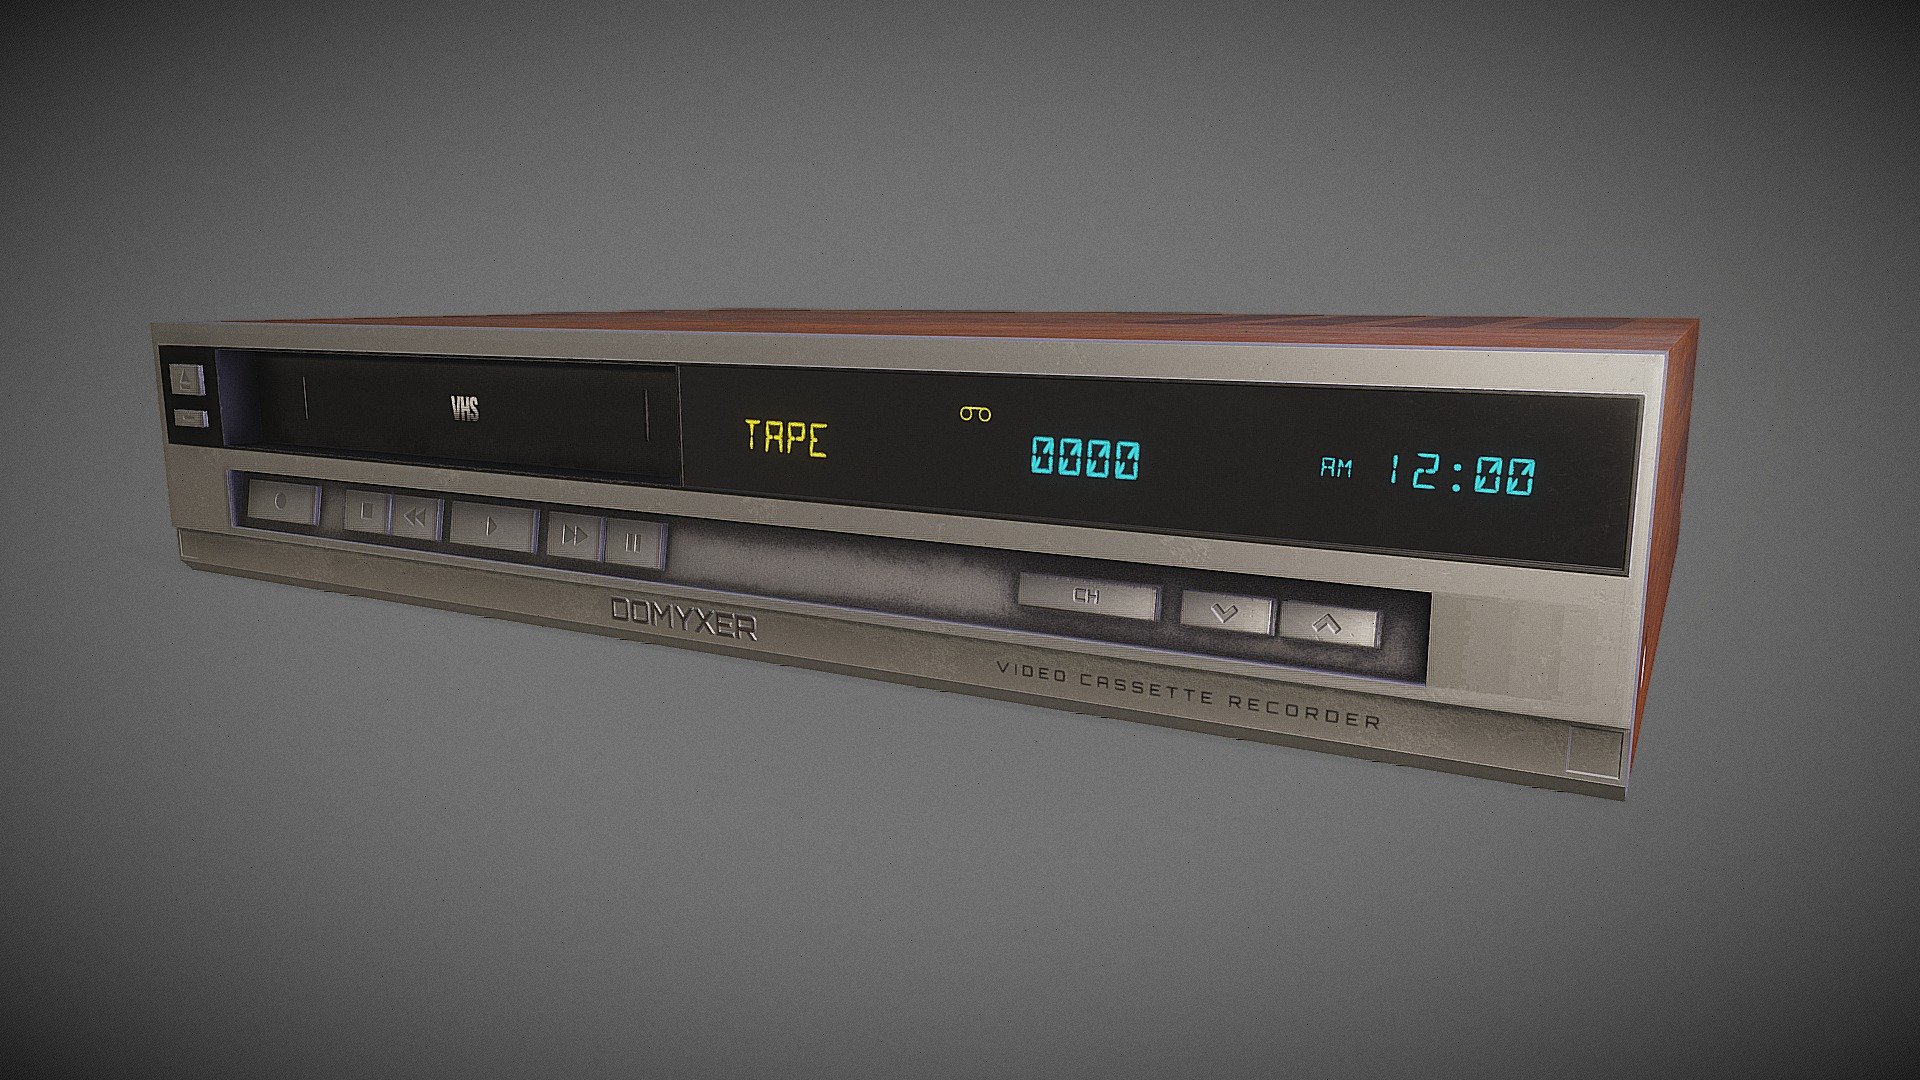 This is a low-poly VHS player, perfect for video games or other applications. Created in Blender, it reflects the essential details of the vintage VCRs from the 80s

Centered at origin. Real world scale. Clean UVs. Fully unwrapped. No overlaps. Materials and textures  4K

Enjoy the model, and leave a feedback, please 3d model